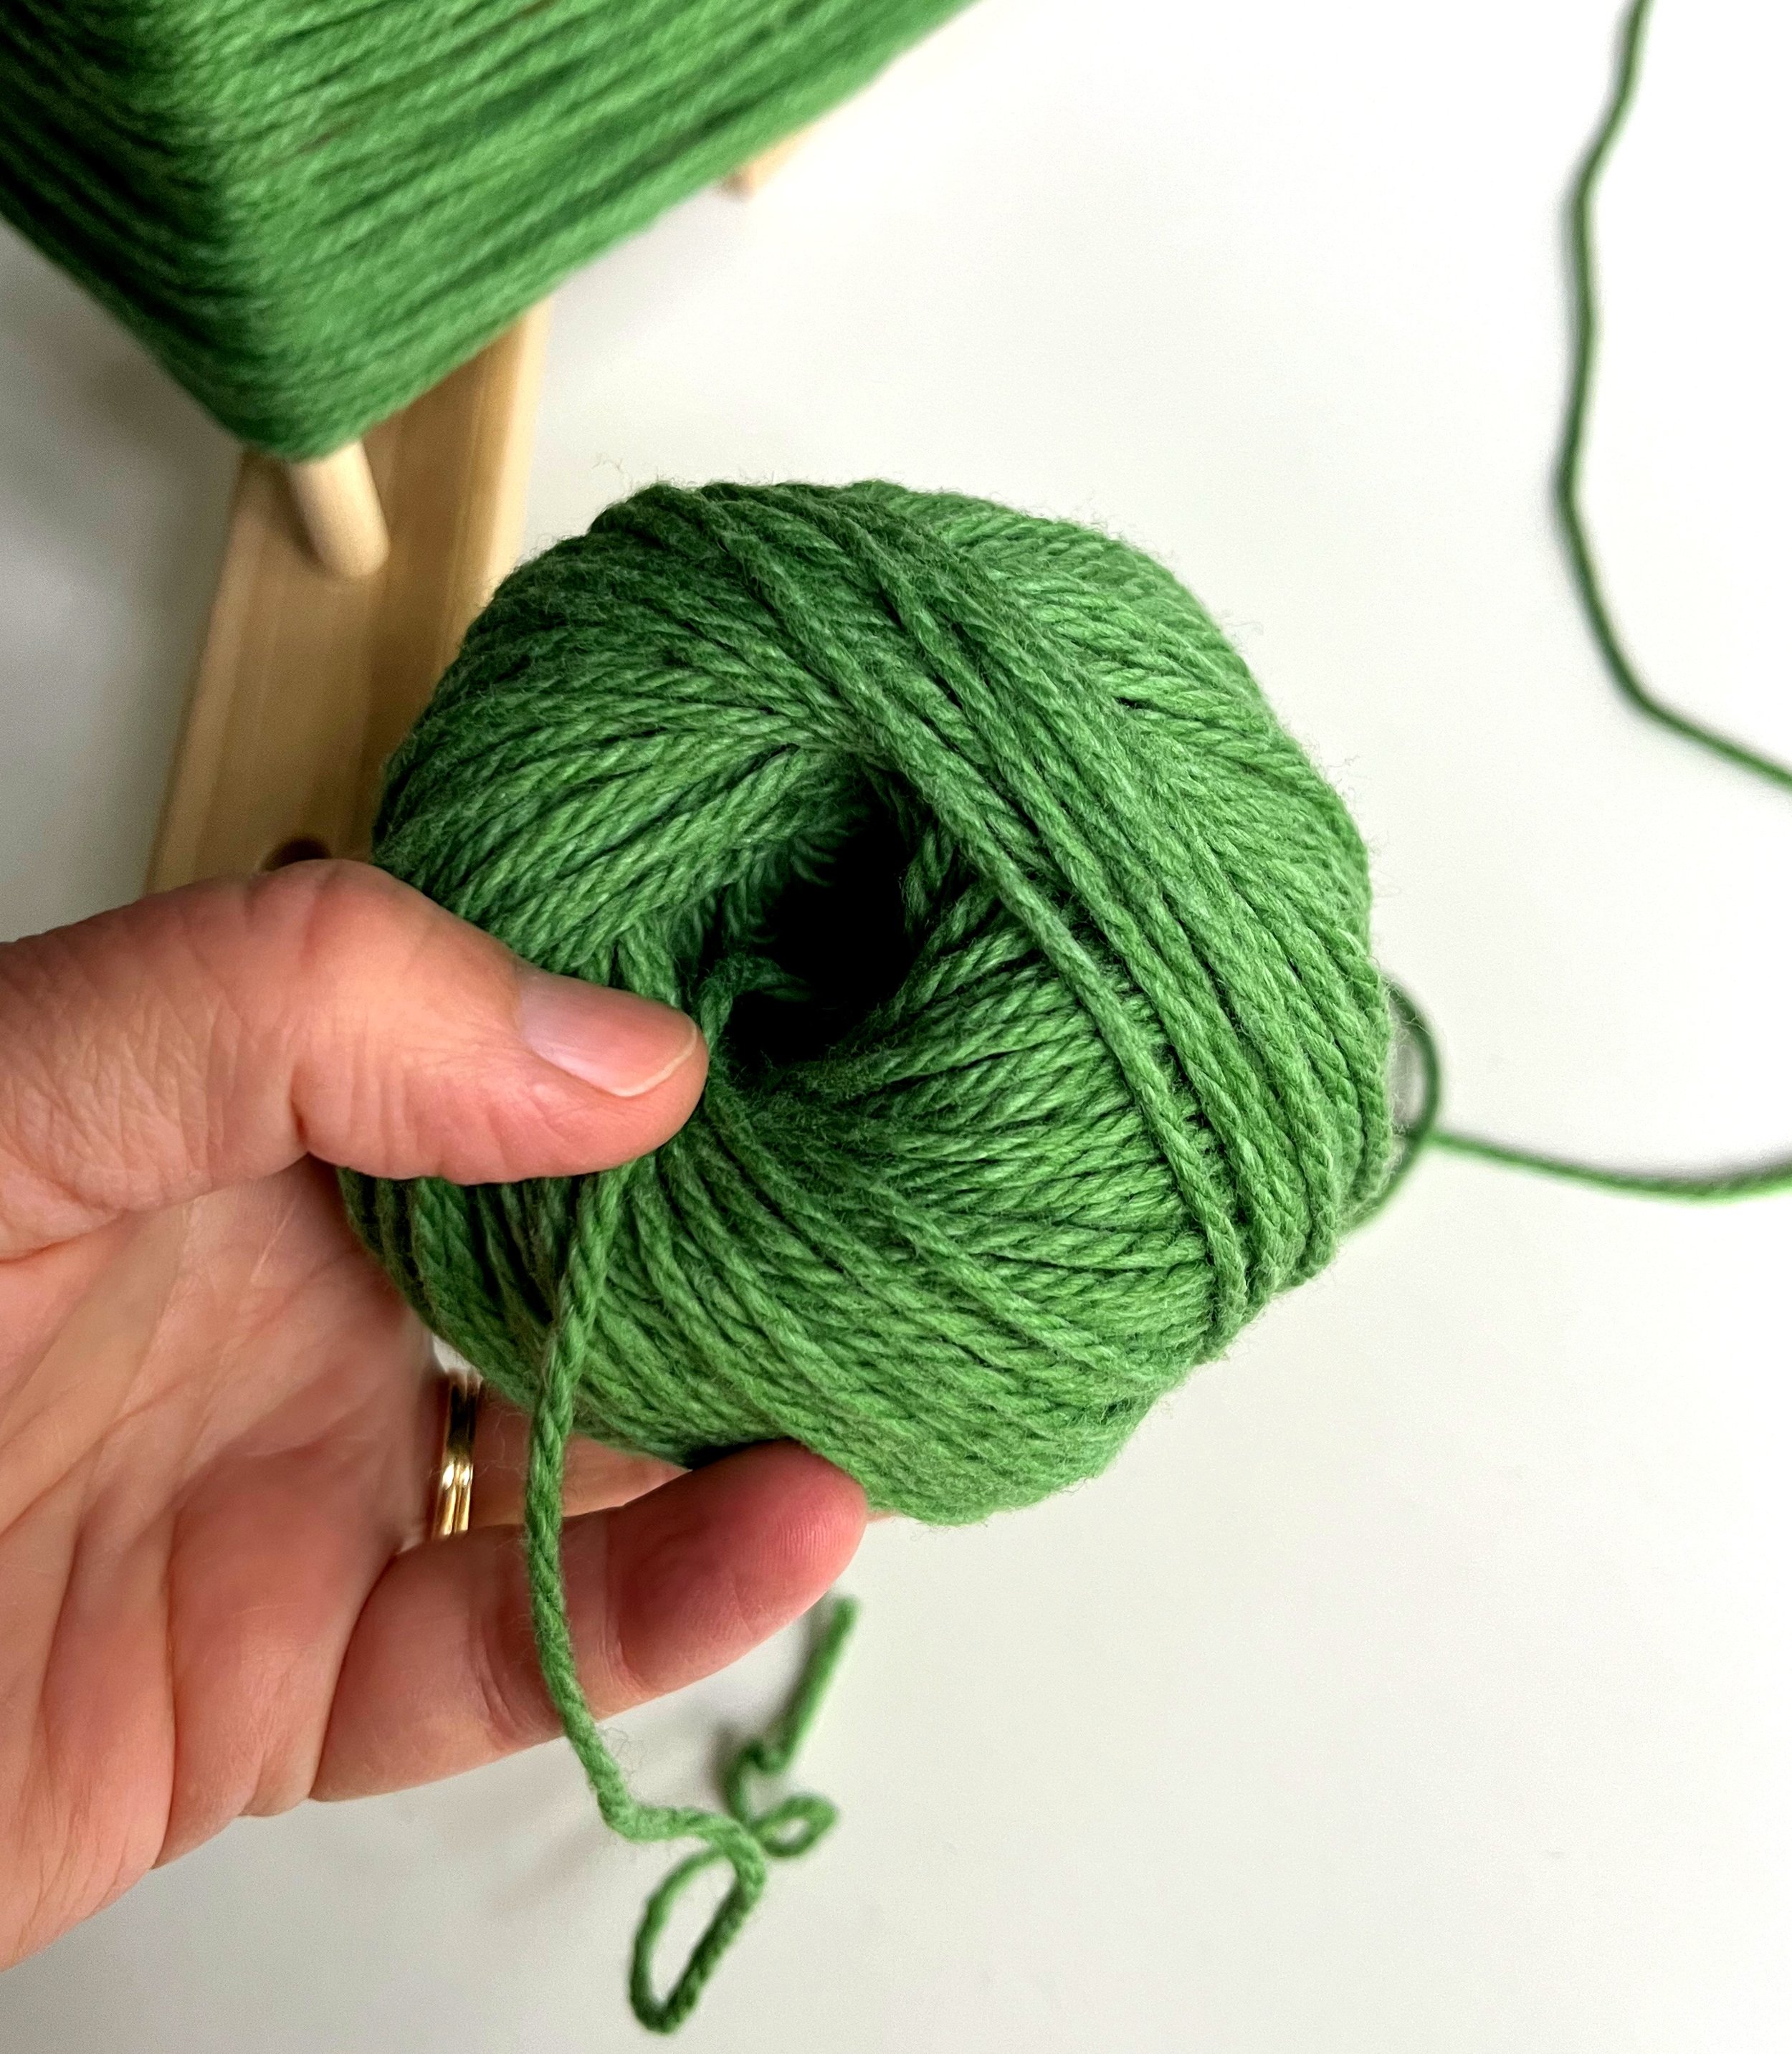 Ideal Delusions: The Best Way to Hand Wind a Ball of Yarn